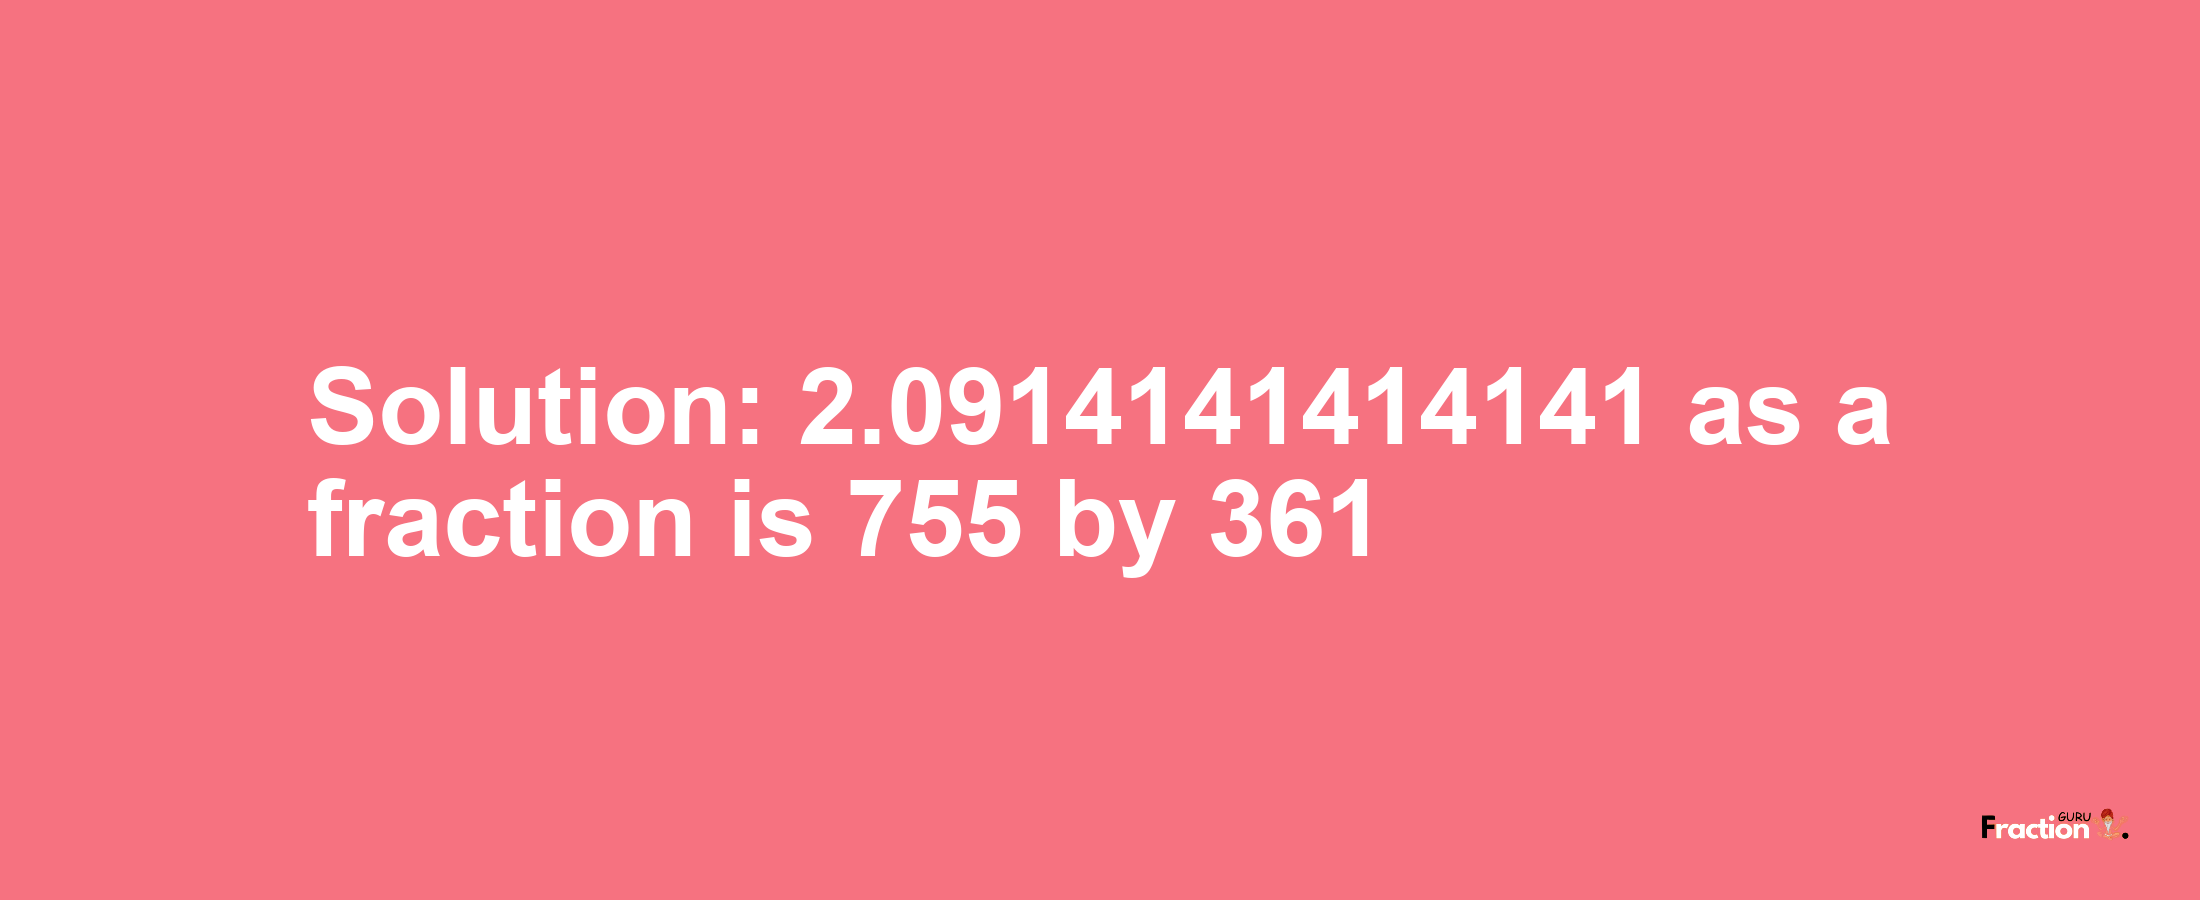 Solution:2.0914141414141 as a fraction is 755/361